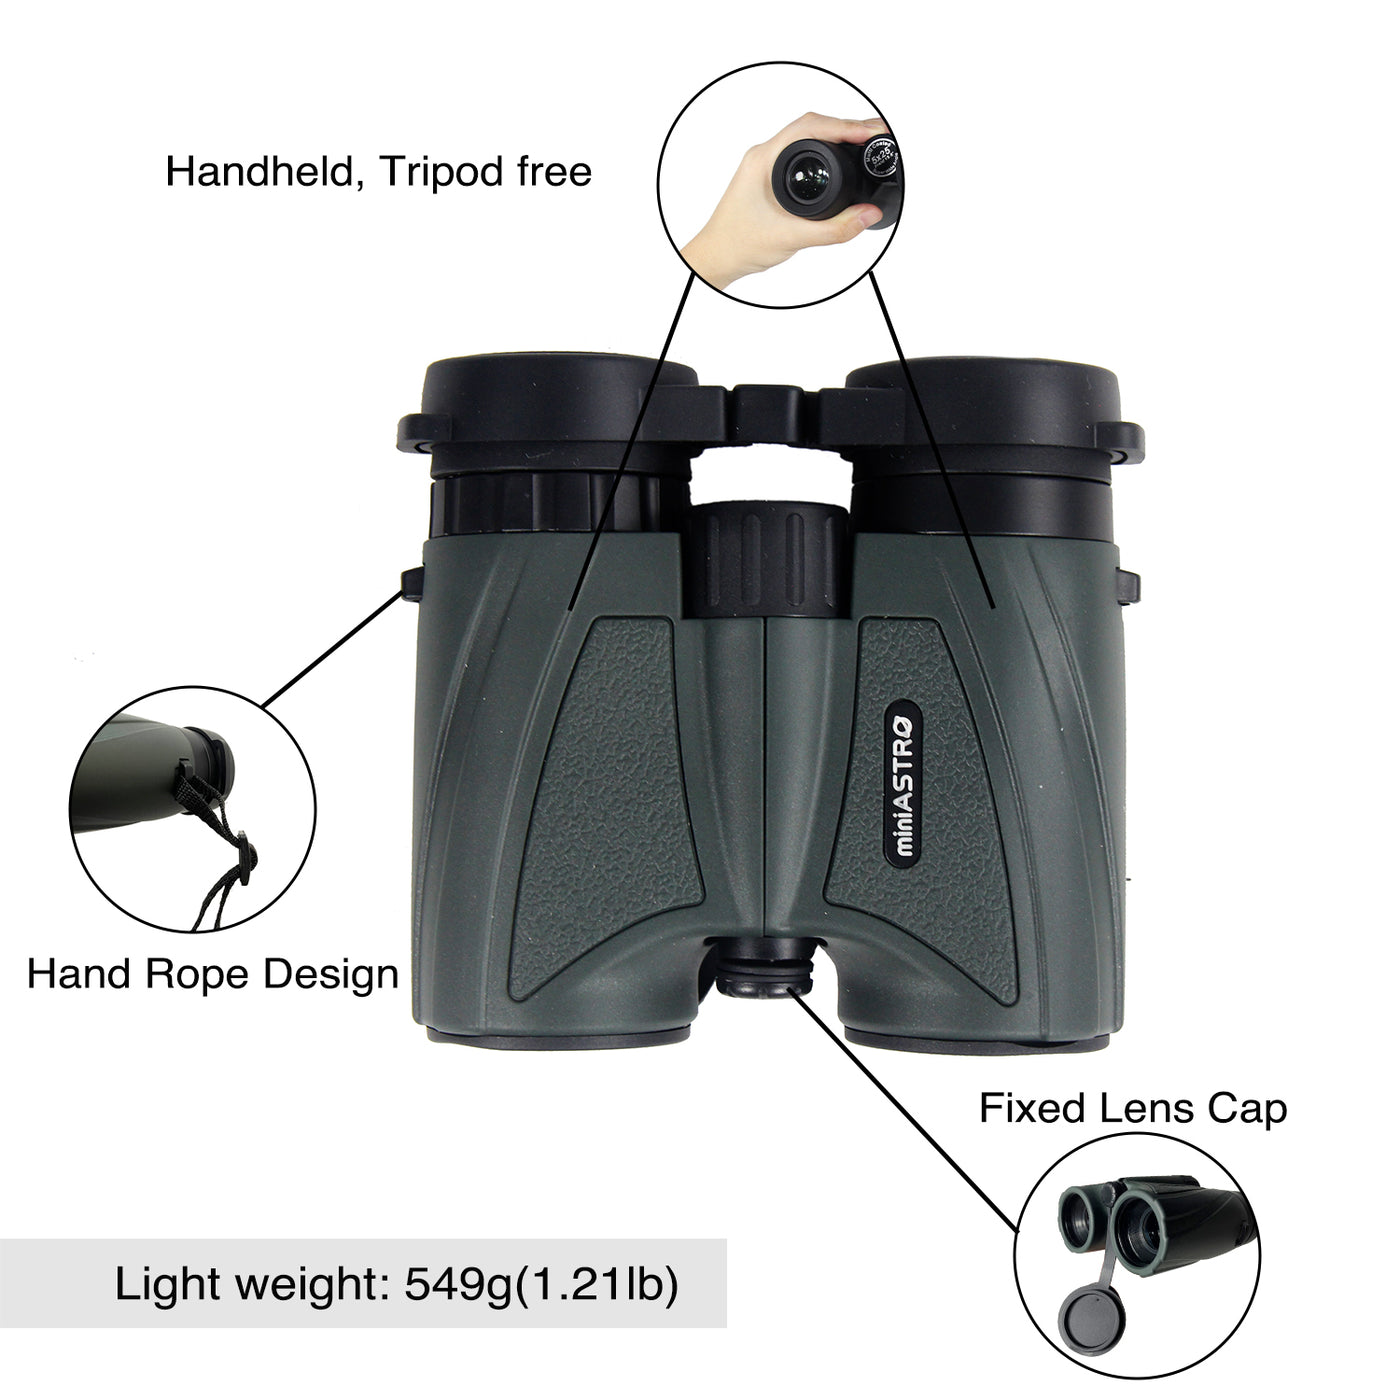 Wide View 15.8°, 5x25 Binoculars for Astro, Sports, Birding and Hunting